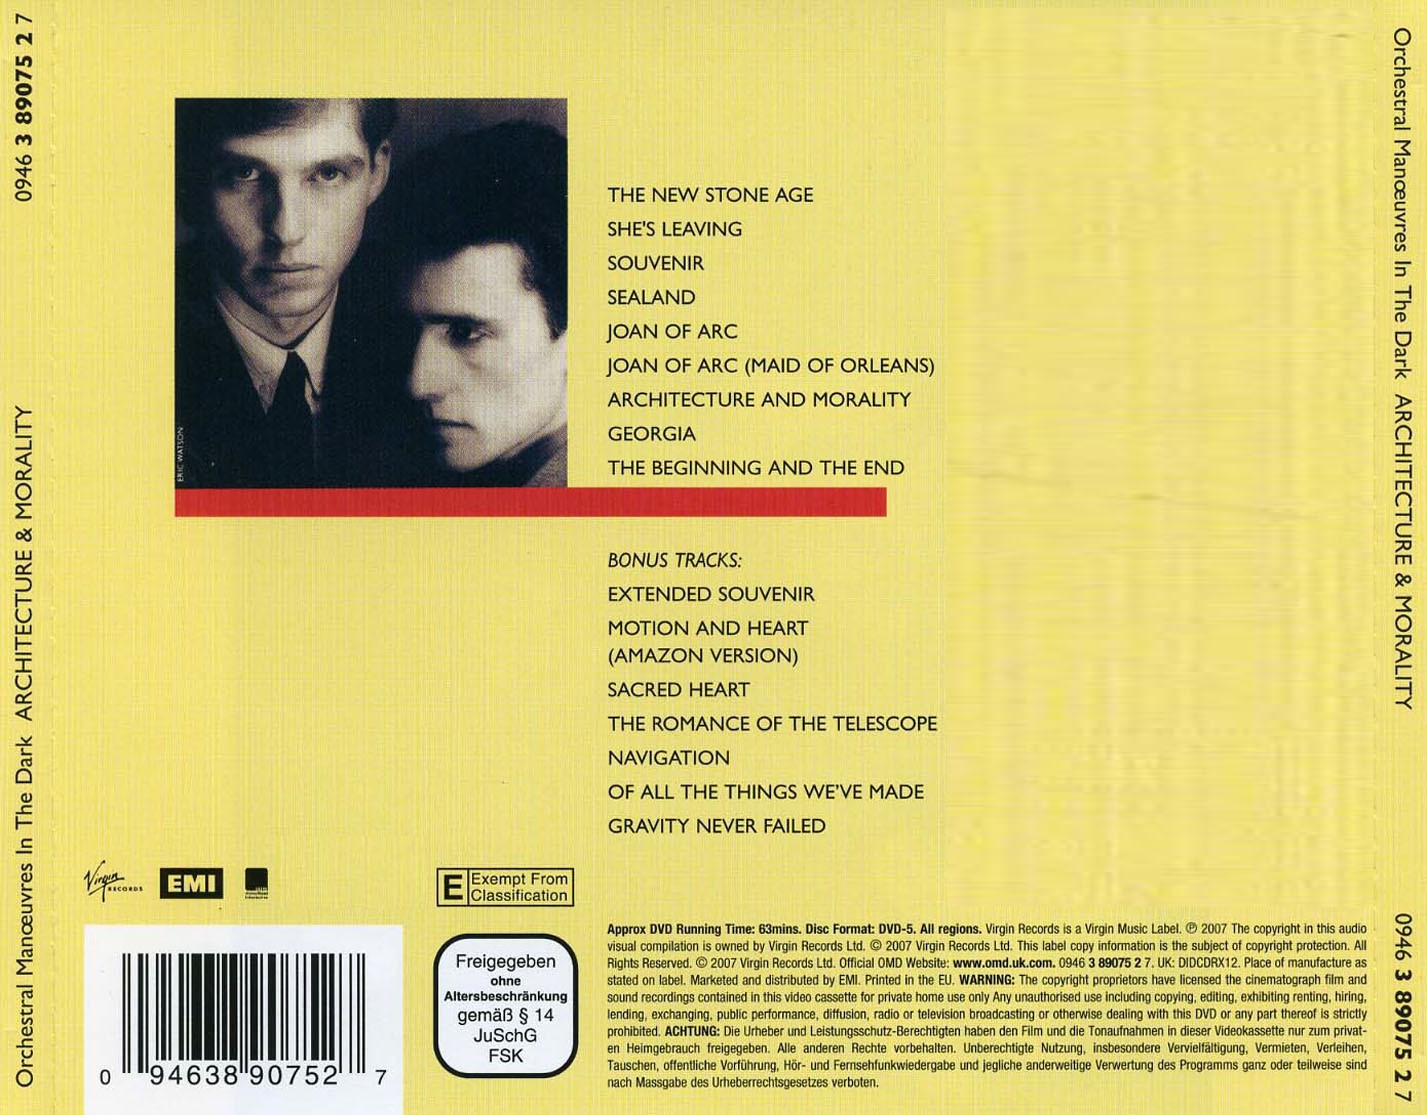 Orchestral Manoeuvres In The Dark Architecture Morality back | CD - Orchestral Manoeuvres In The Dark Architecture & Morality